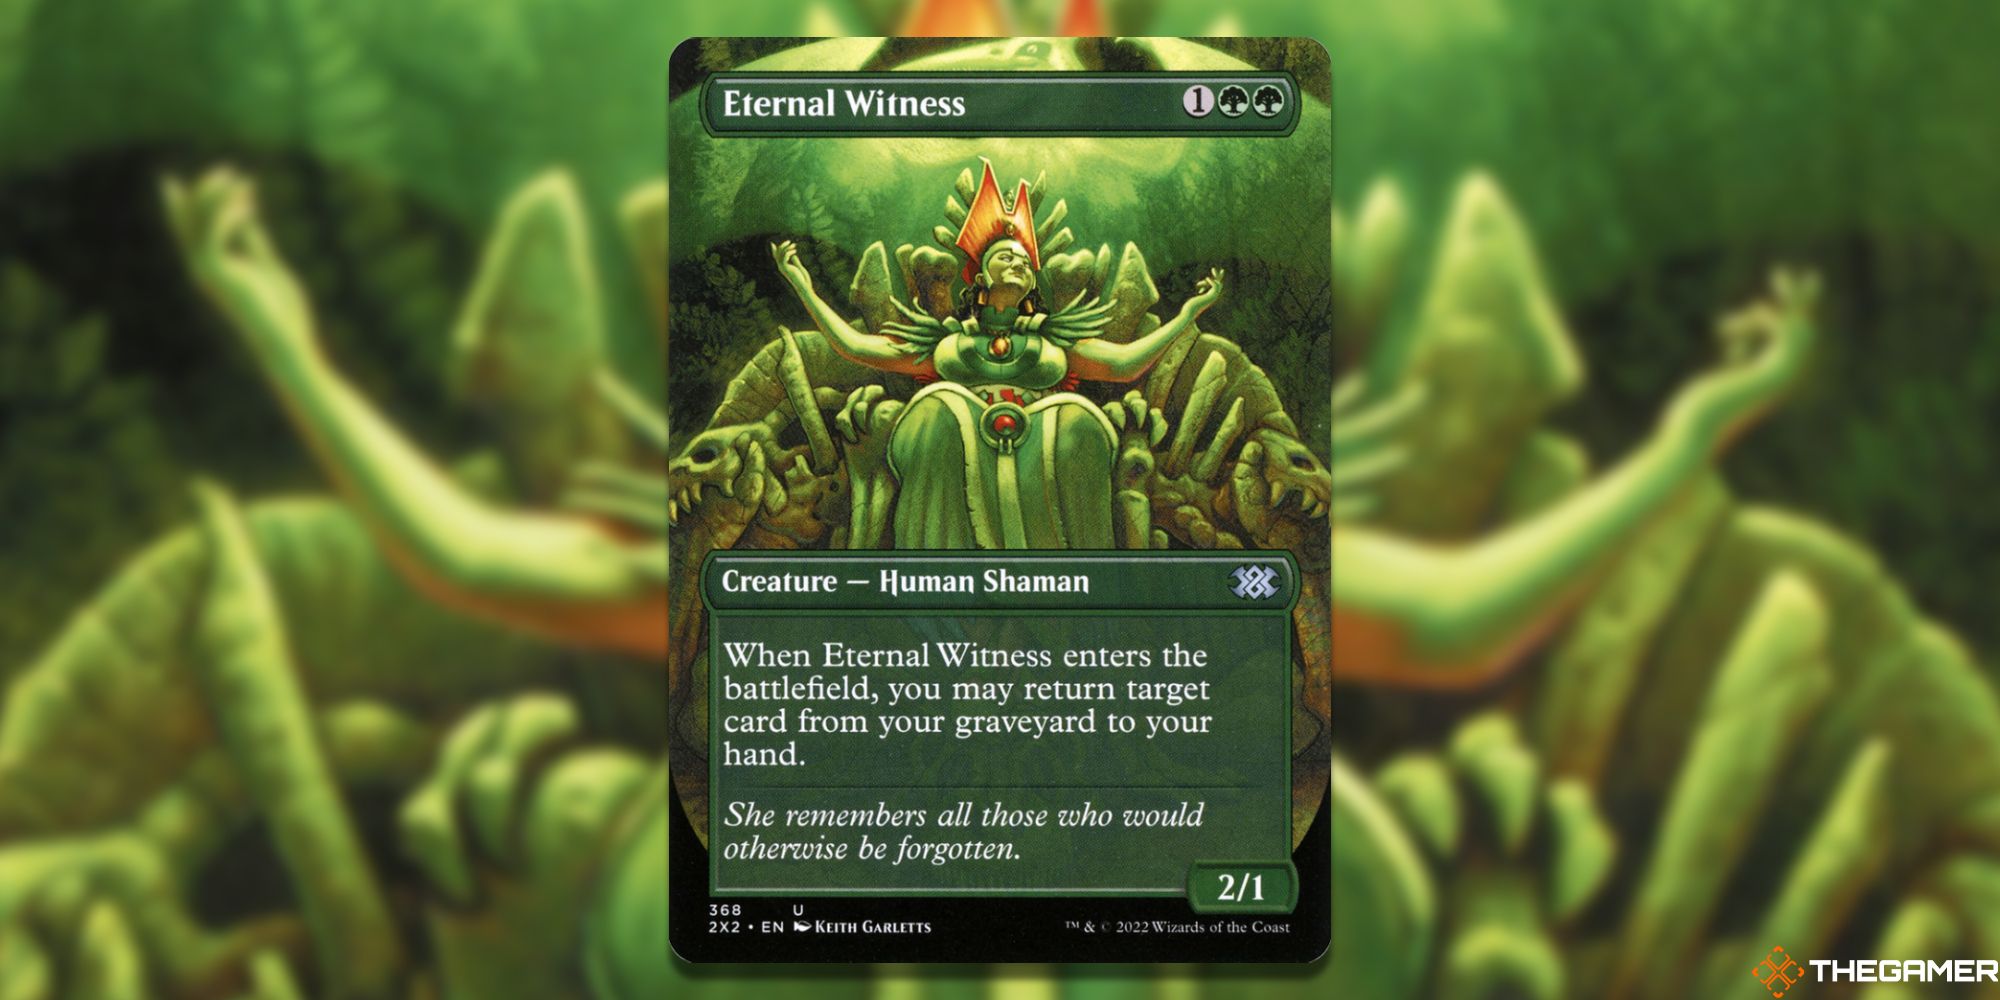 The card Eternal Witness from Magic: The Gathering.